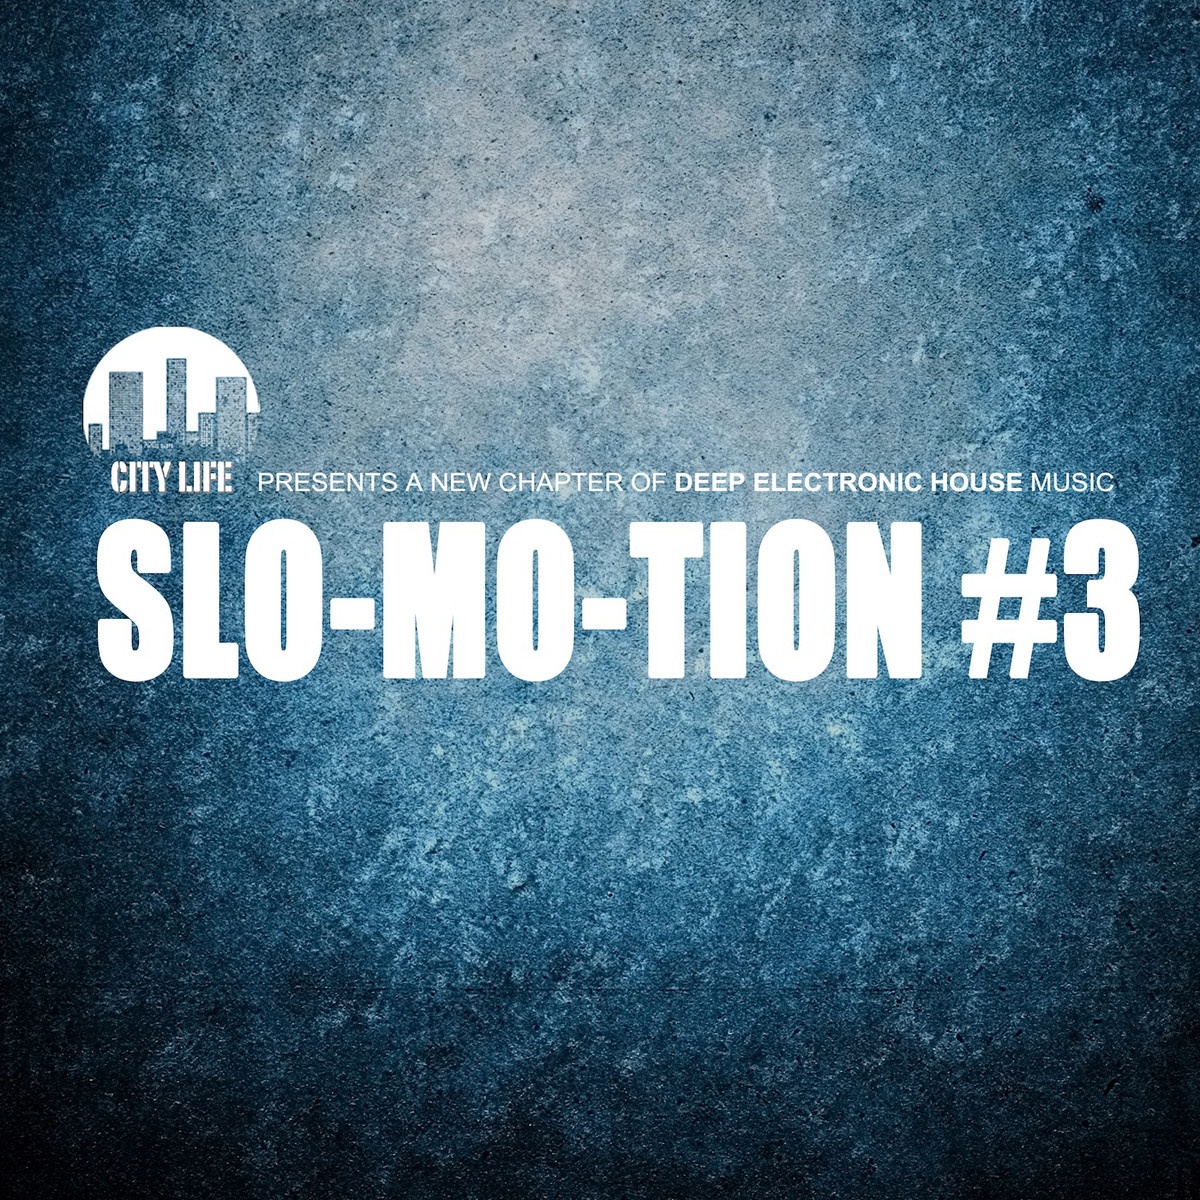 Slo-Mo-Tion #3 - A New Chapter of Deep Electronic House Music